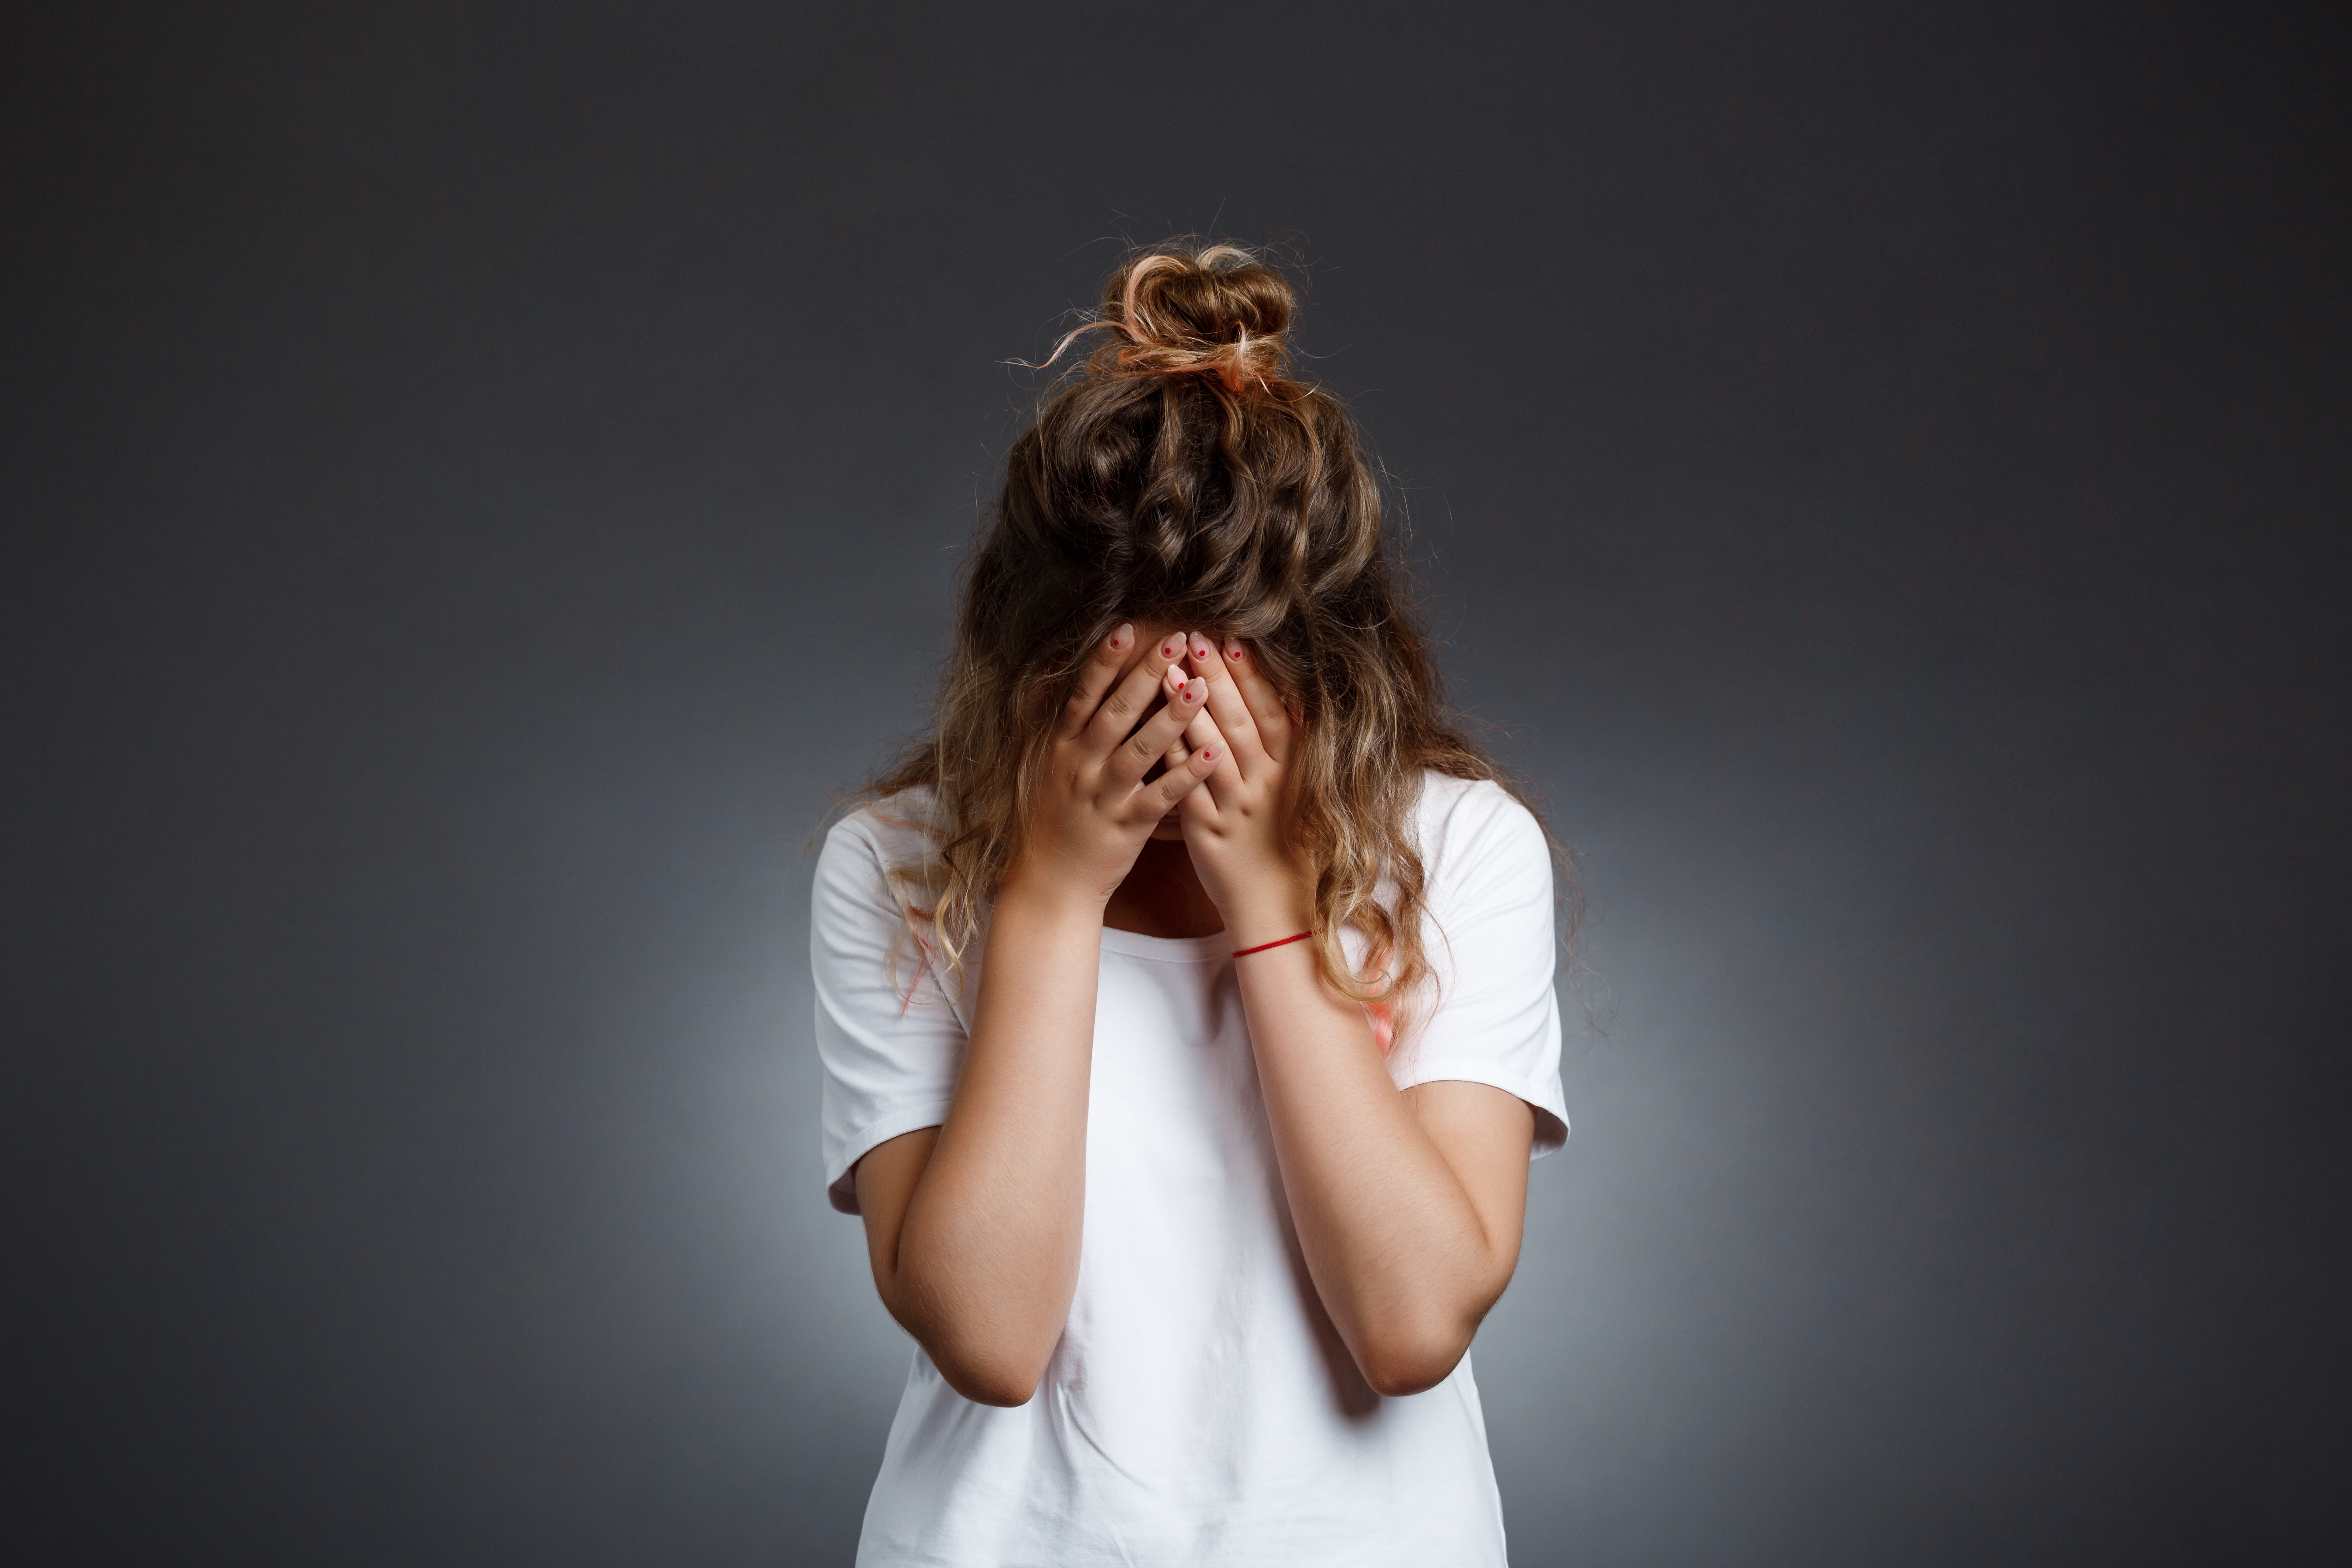 Upset young woman with her head in her hands | Source: Shutterstock